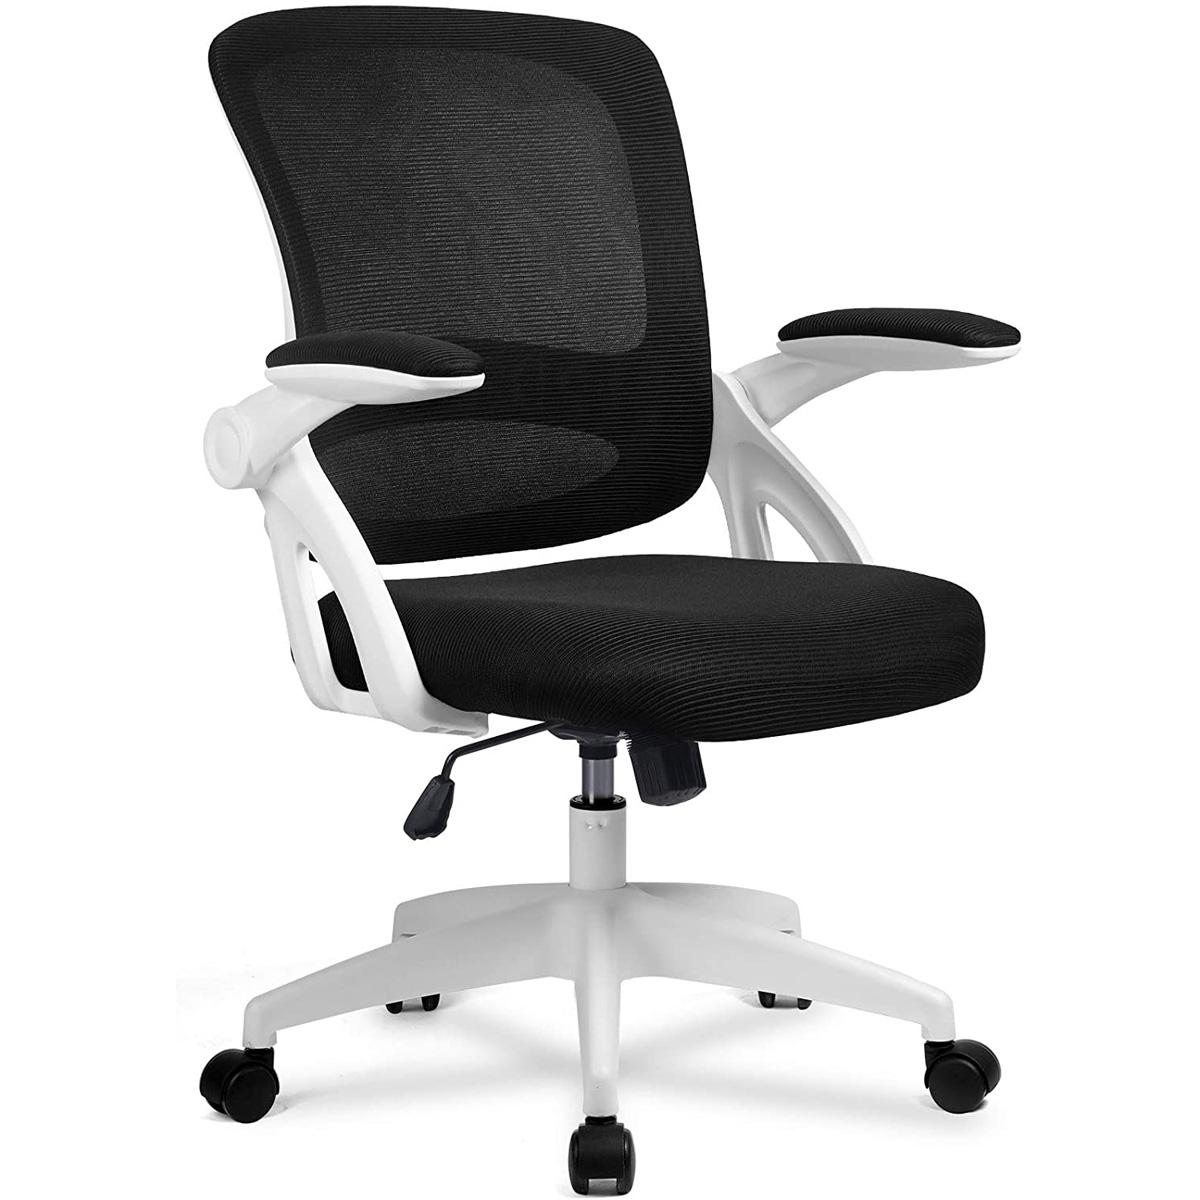 ComHoma Office Chair Ergonomic Desk Chair Mesh Computer Chair for $76.49 Shipped